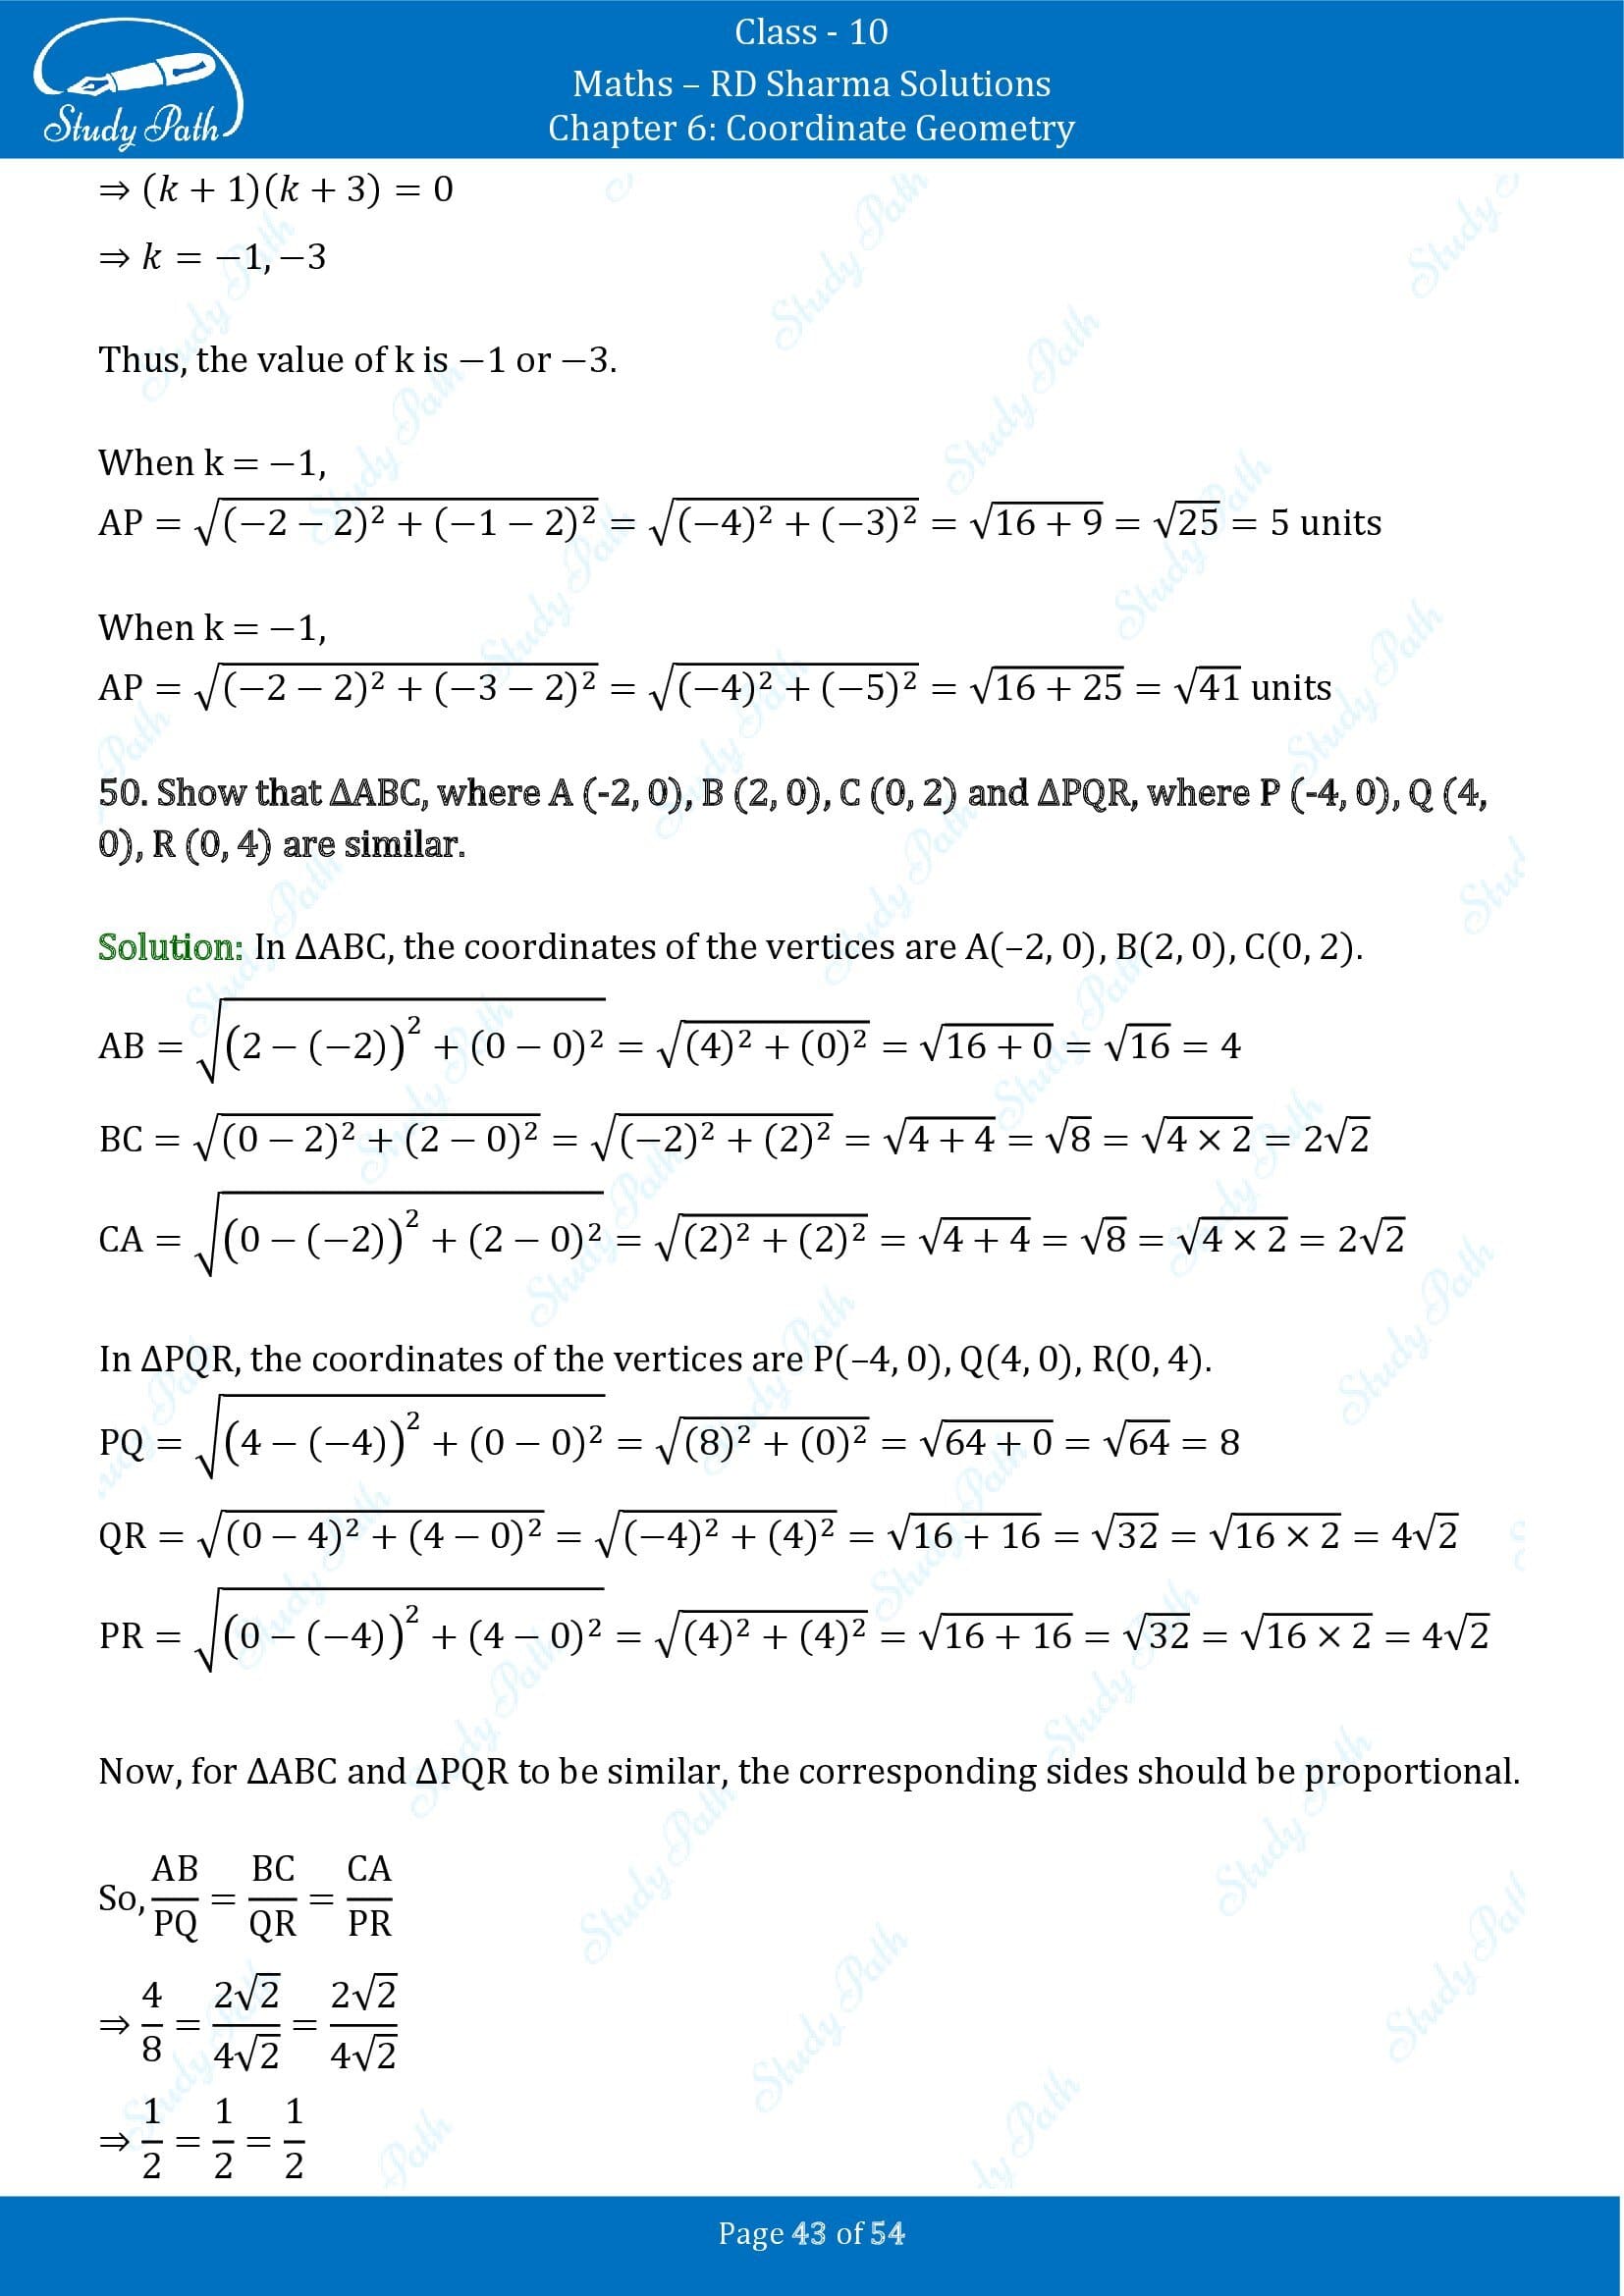 RD Sharma Solutions Class 10 Chapter 6 Coordinate Geometry Exercise 6.2 0043